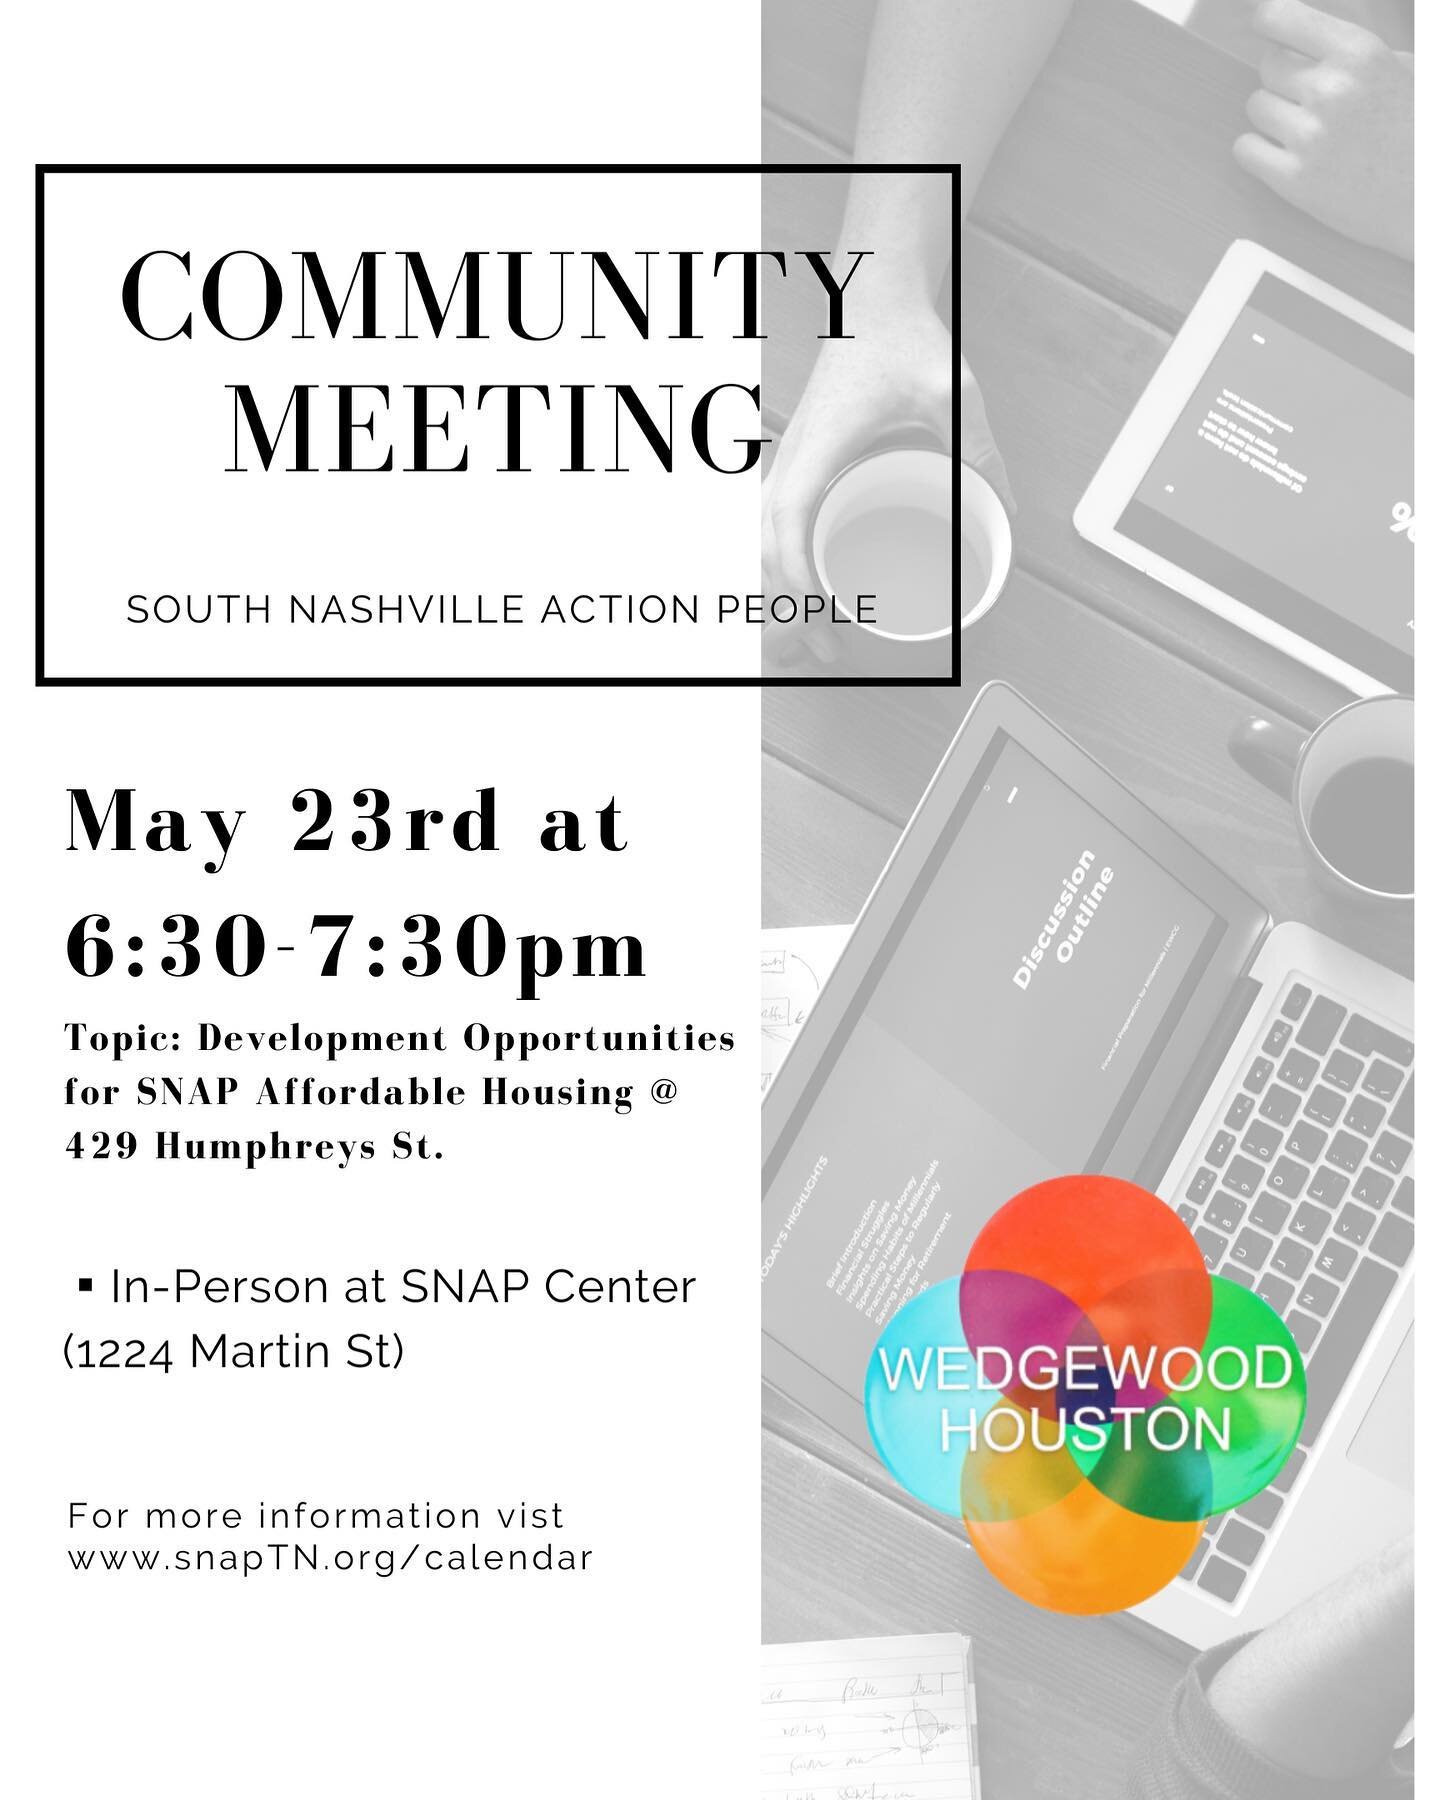 Join us at the SNAP Center (1224 Martin St.) for the May community meeting. We all know affordable housing is in great need here in WeHo and Nashville in general. But did you know SNAP owns and oversees its own affordable housing units at 429 Humphre